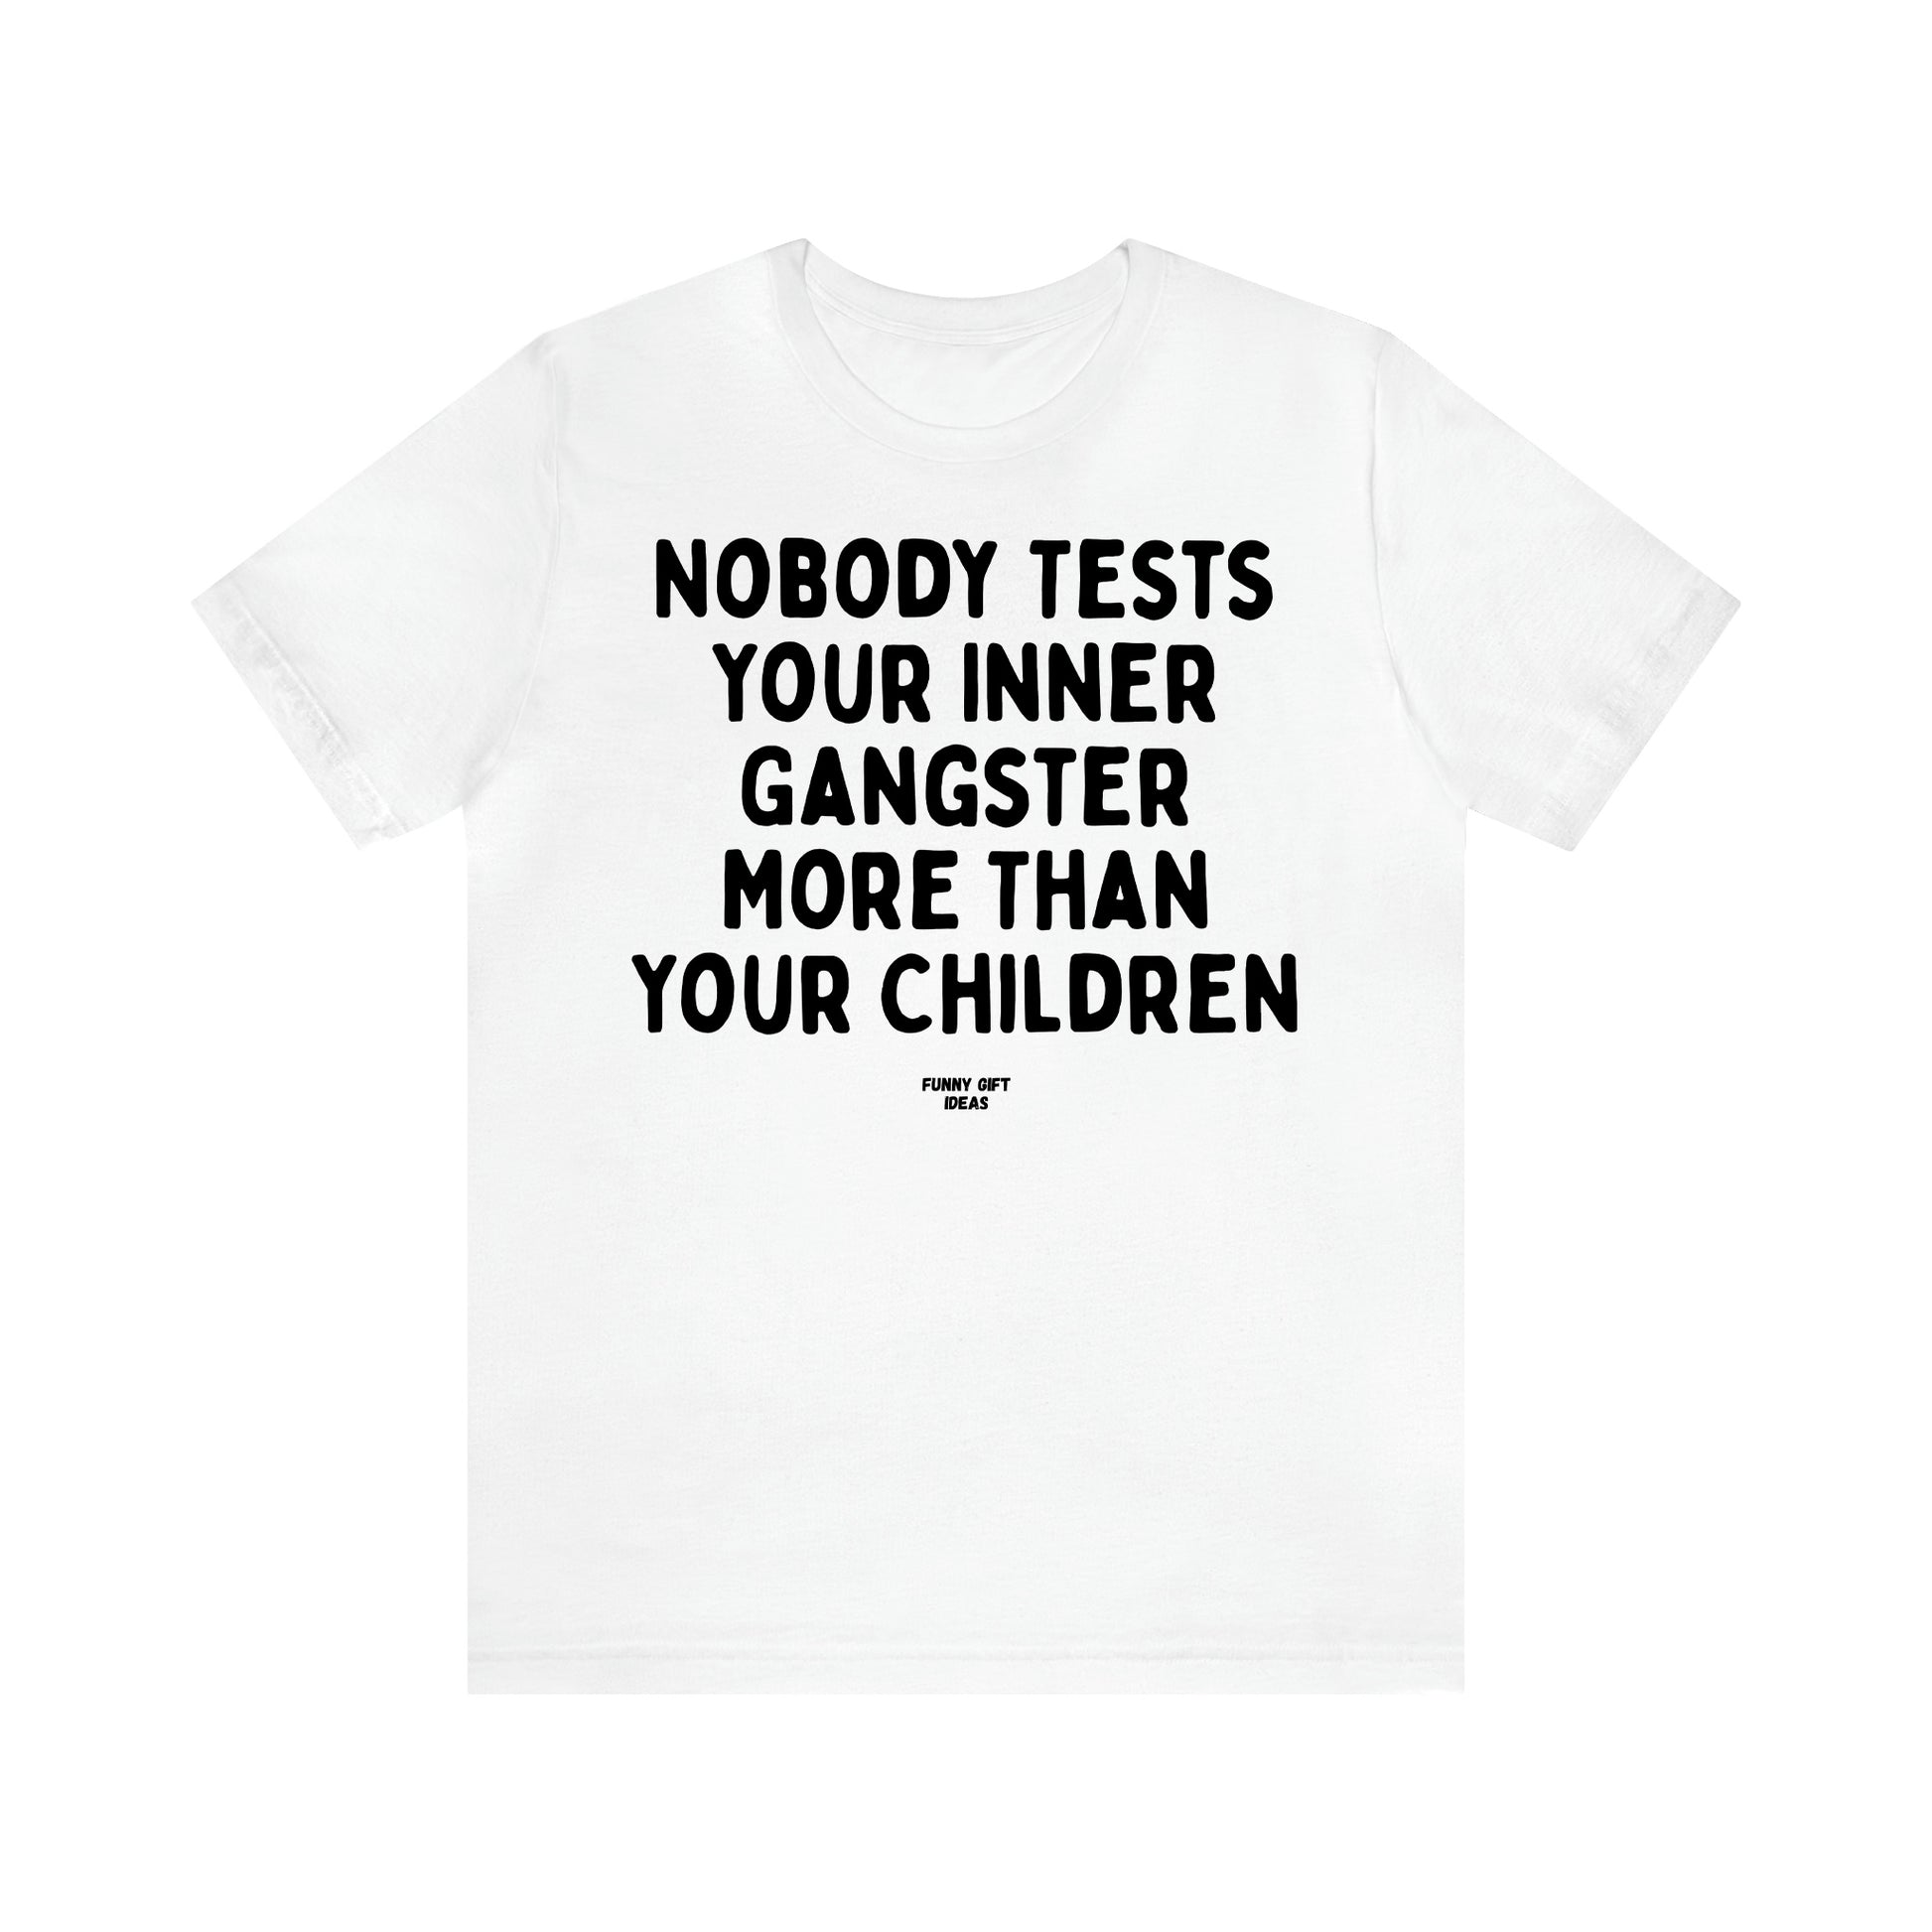 Women's T Shirts Nobody Tests Your Inner Gangster More Than Your Children - Funny Gift Ideas